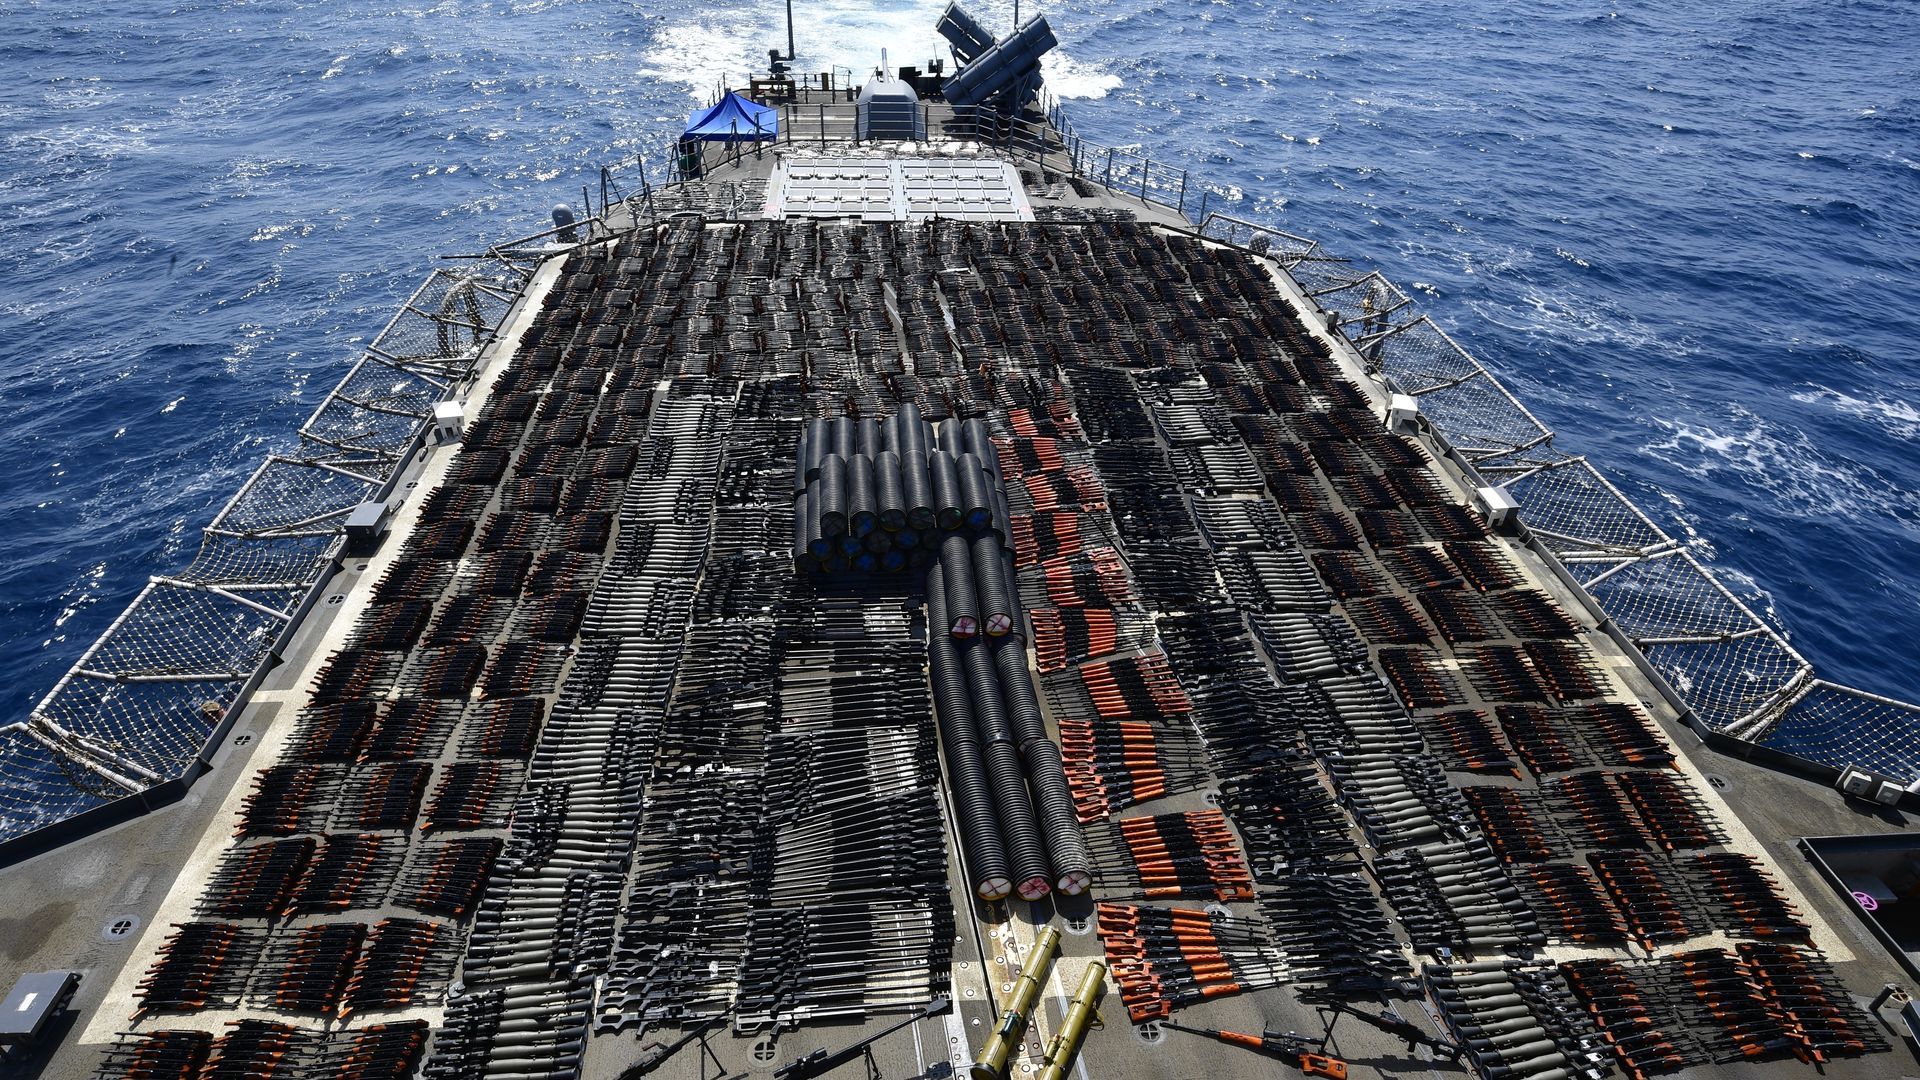 Weapons on a ship's deck 